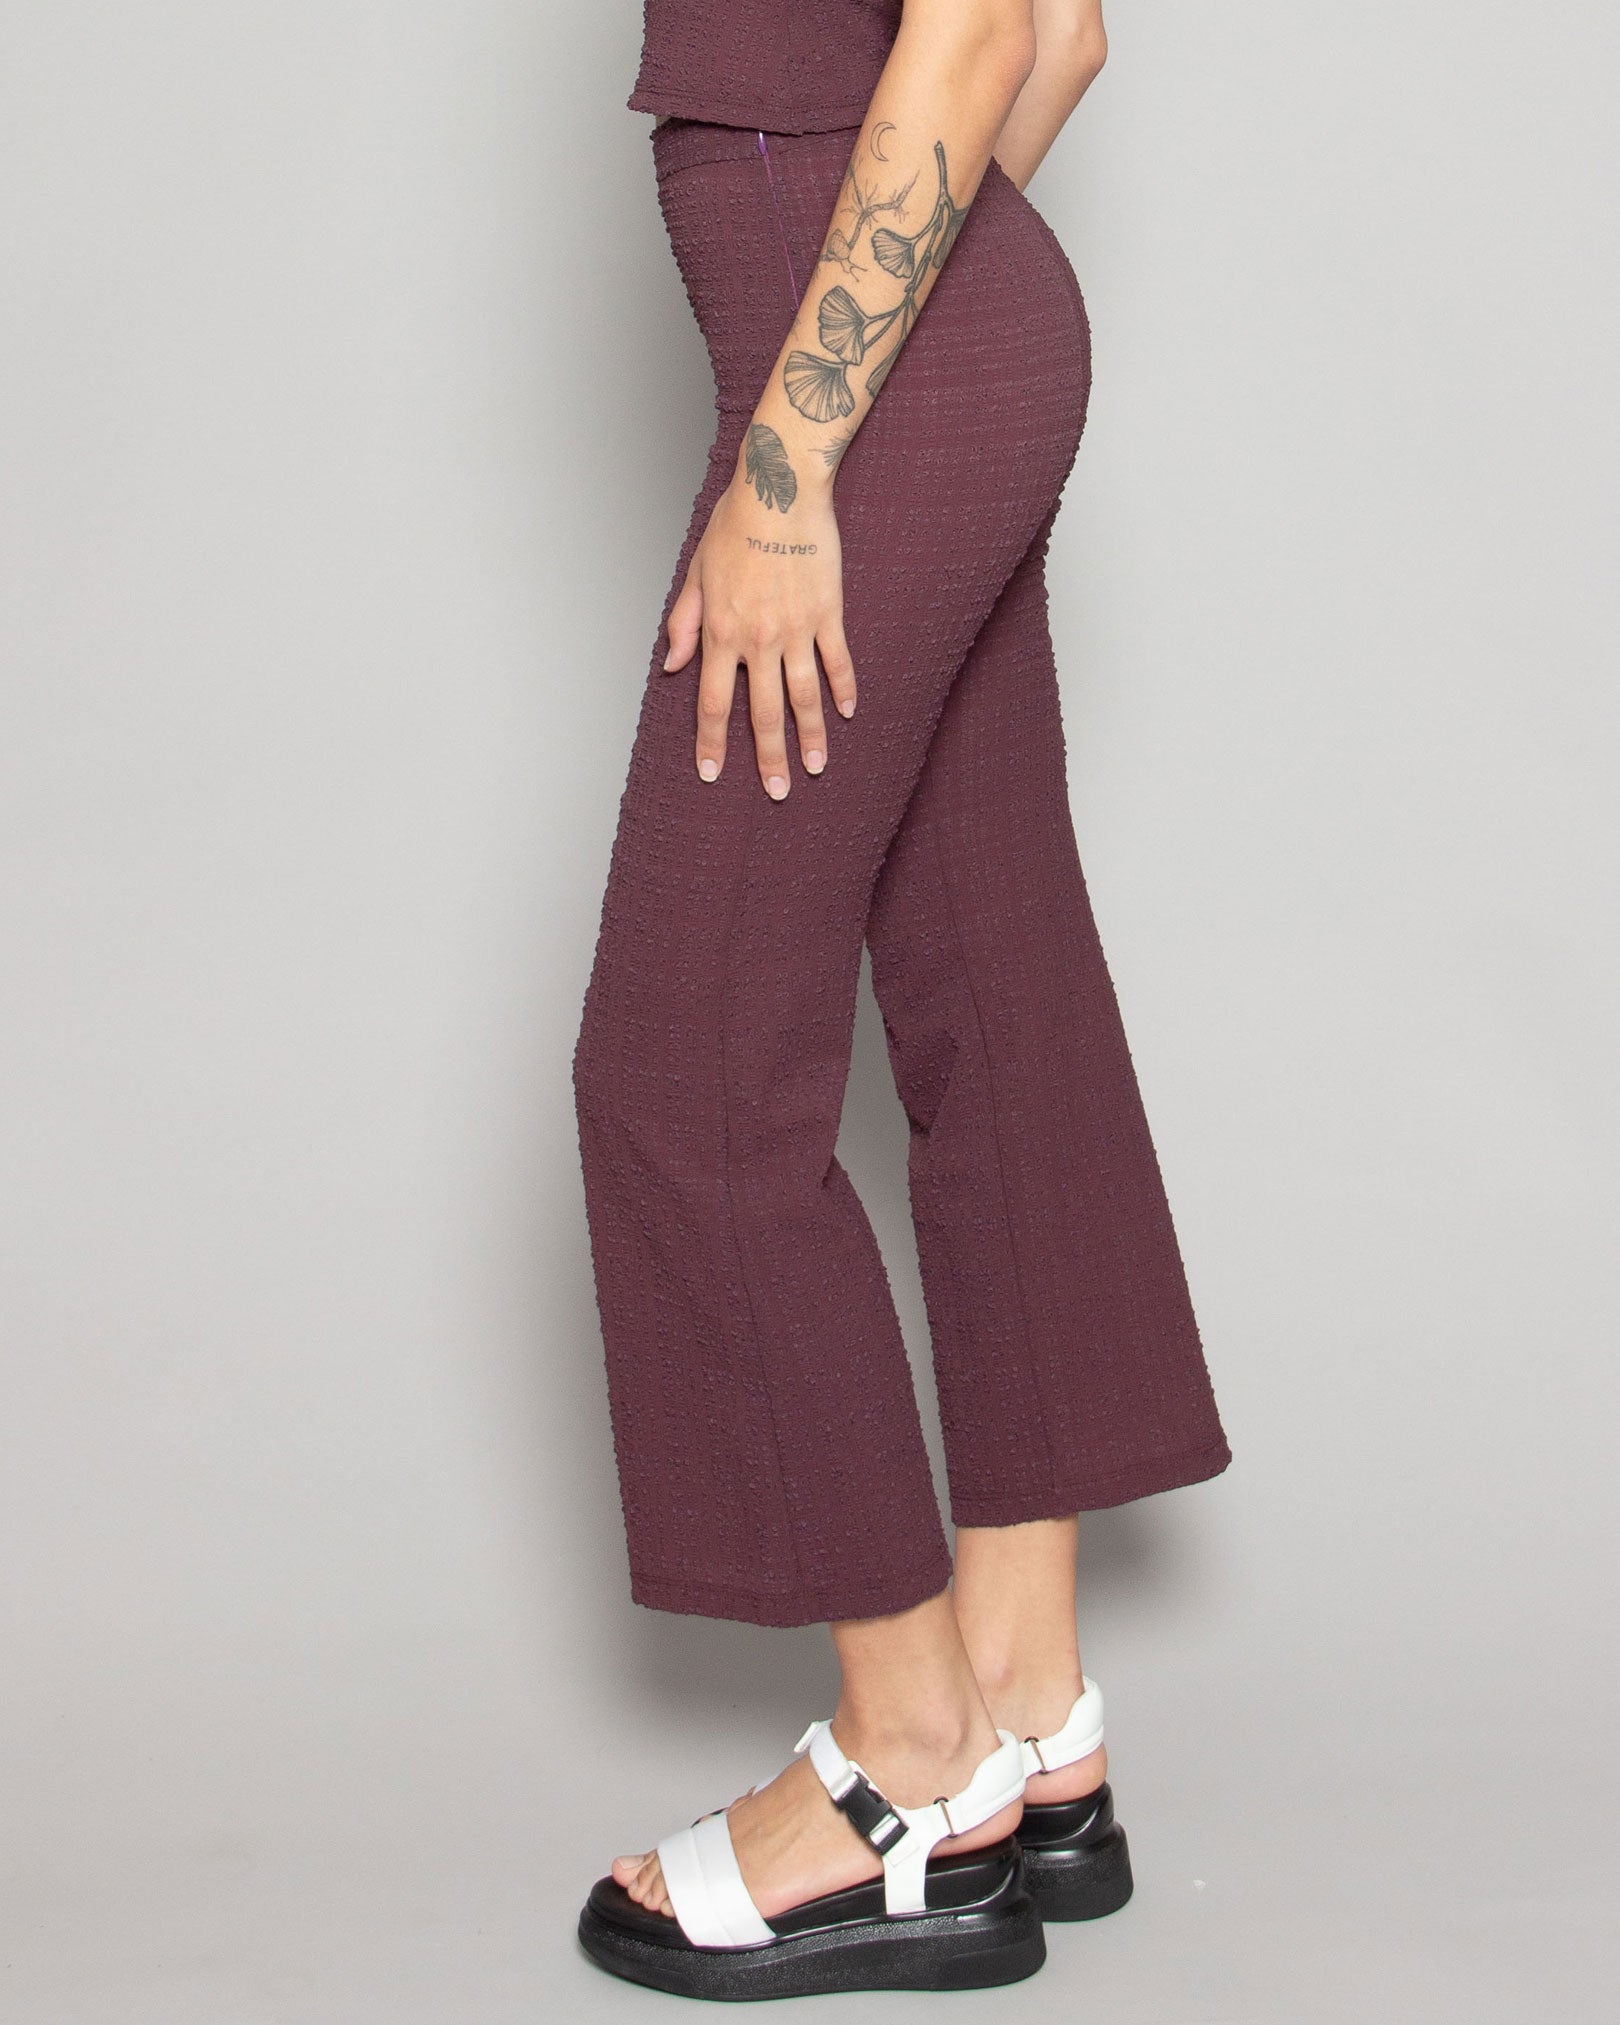 RACHEL COMEY Mando Pant in Maroon Stretchy Check available at Lahn.shop